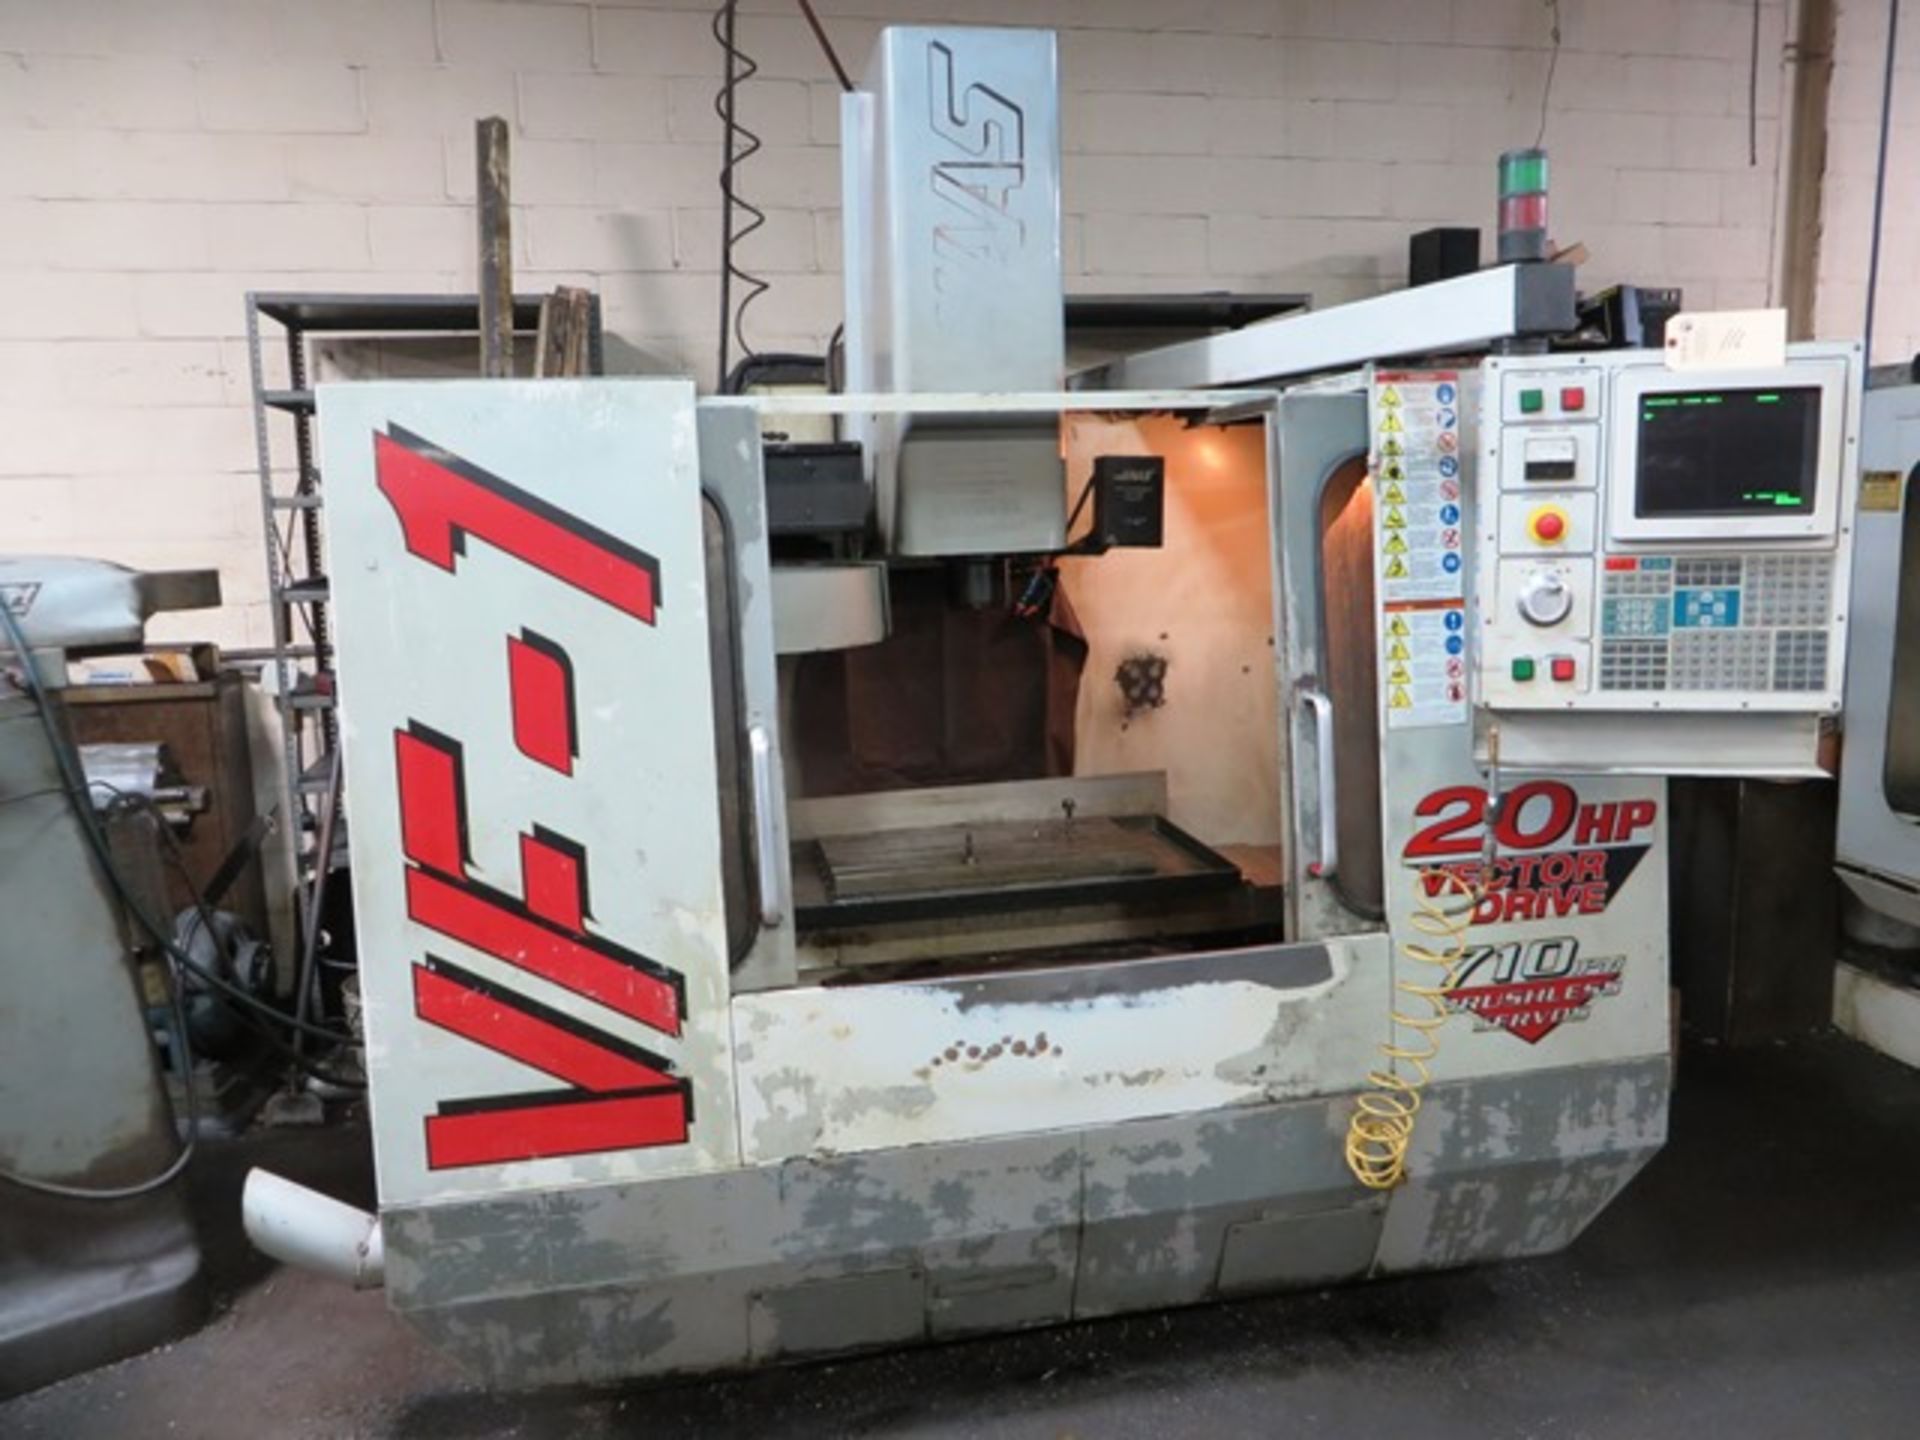 Haas VF-1 CNC Vertical Machining Center - Image 3 of 5